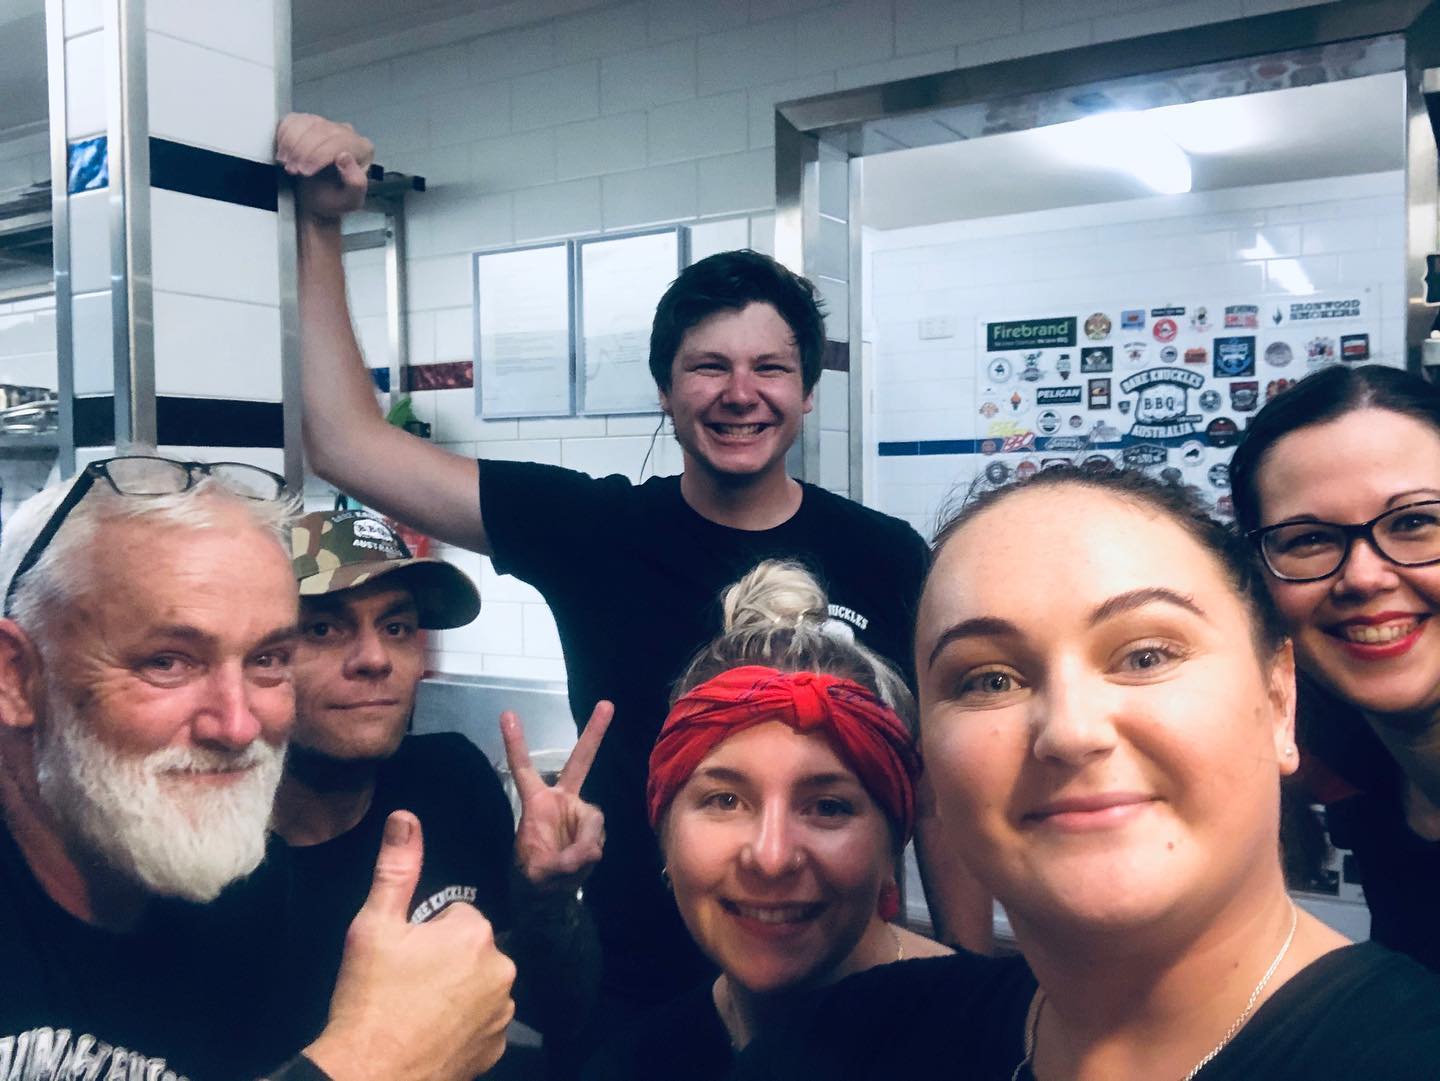 BIG LOVE to this crew.. and my amazing wife @me_kirst.. and to all who have ‘smashed’ us for the last two days.. it’s mind blowing !? So far over 2 days we’ve consumed over 20 briskets and 16 pork butts.. don’t even get me started on Pork Ribs, Wings, hotlinks, Mac n cheese and our amazing brisket smash burgers !!! Add to that I now get to spend the night at the shop smoking thru the night so we can serve you tomorrow!! Be gentle., love to all !!!! It’s humbling.,, thanks again ! Jamie & Kirsten Day 🏻 #realbbq #woodfired #noplugstobefound